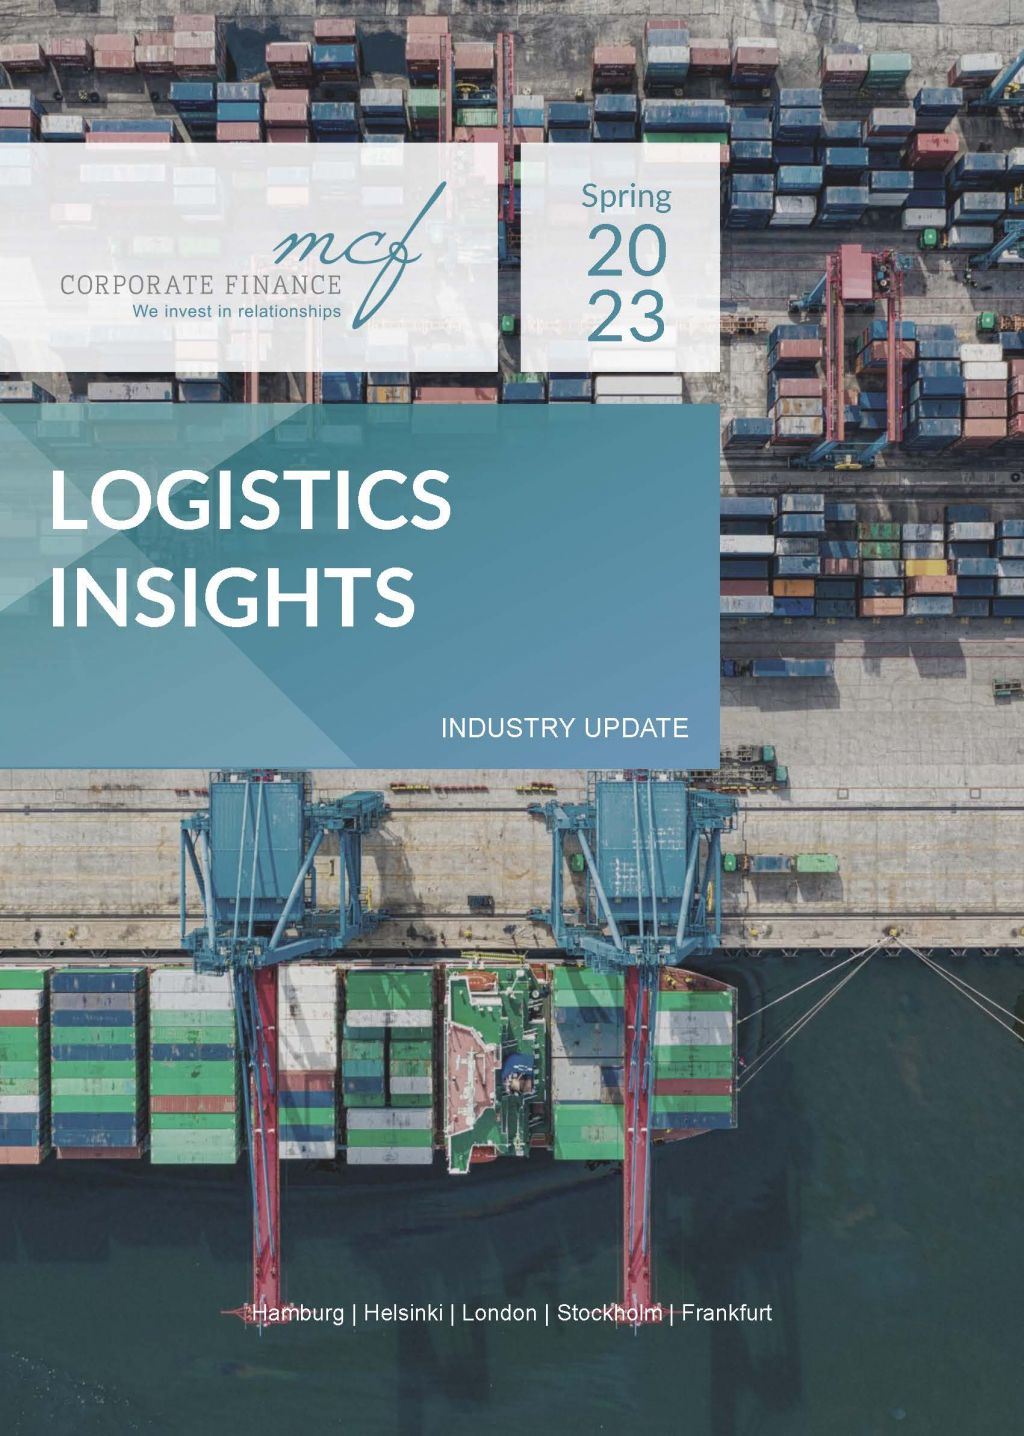 Photo of a container yard and shipping container and front cover to M&A Insights report on Logistics